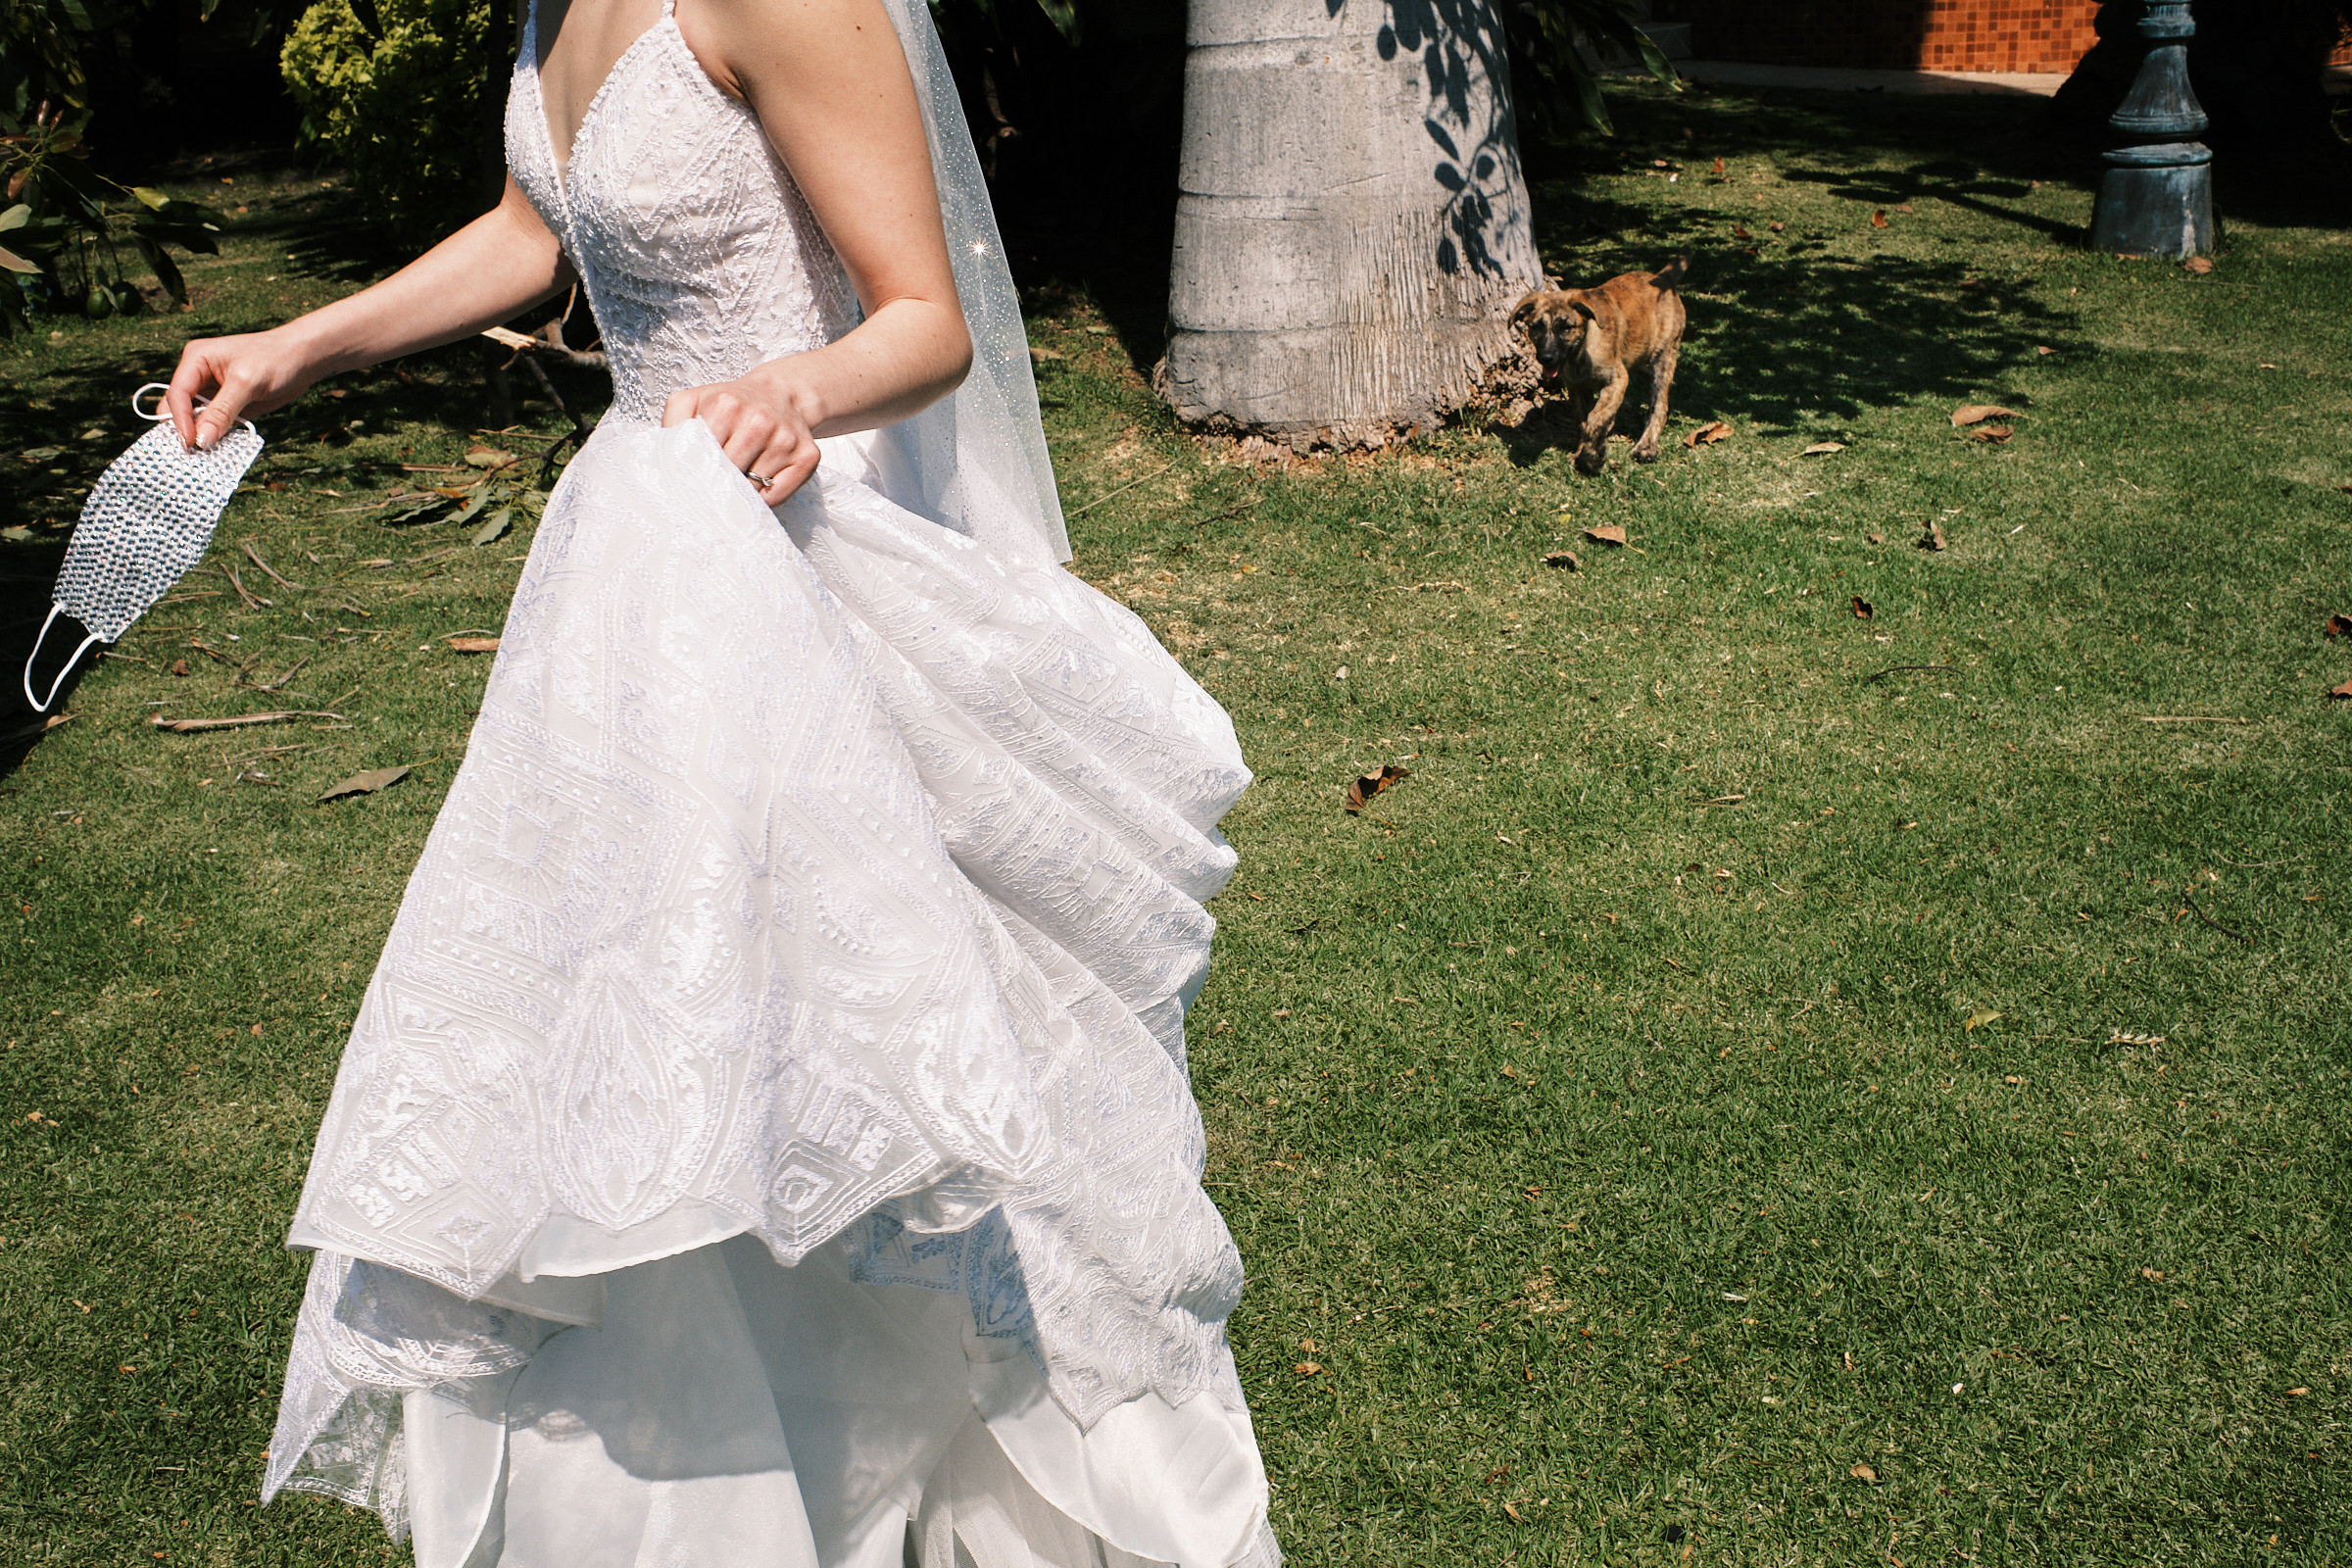 Bride Walks On Grass And Dog On The Background